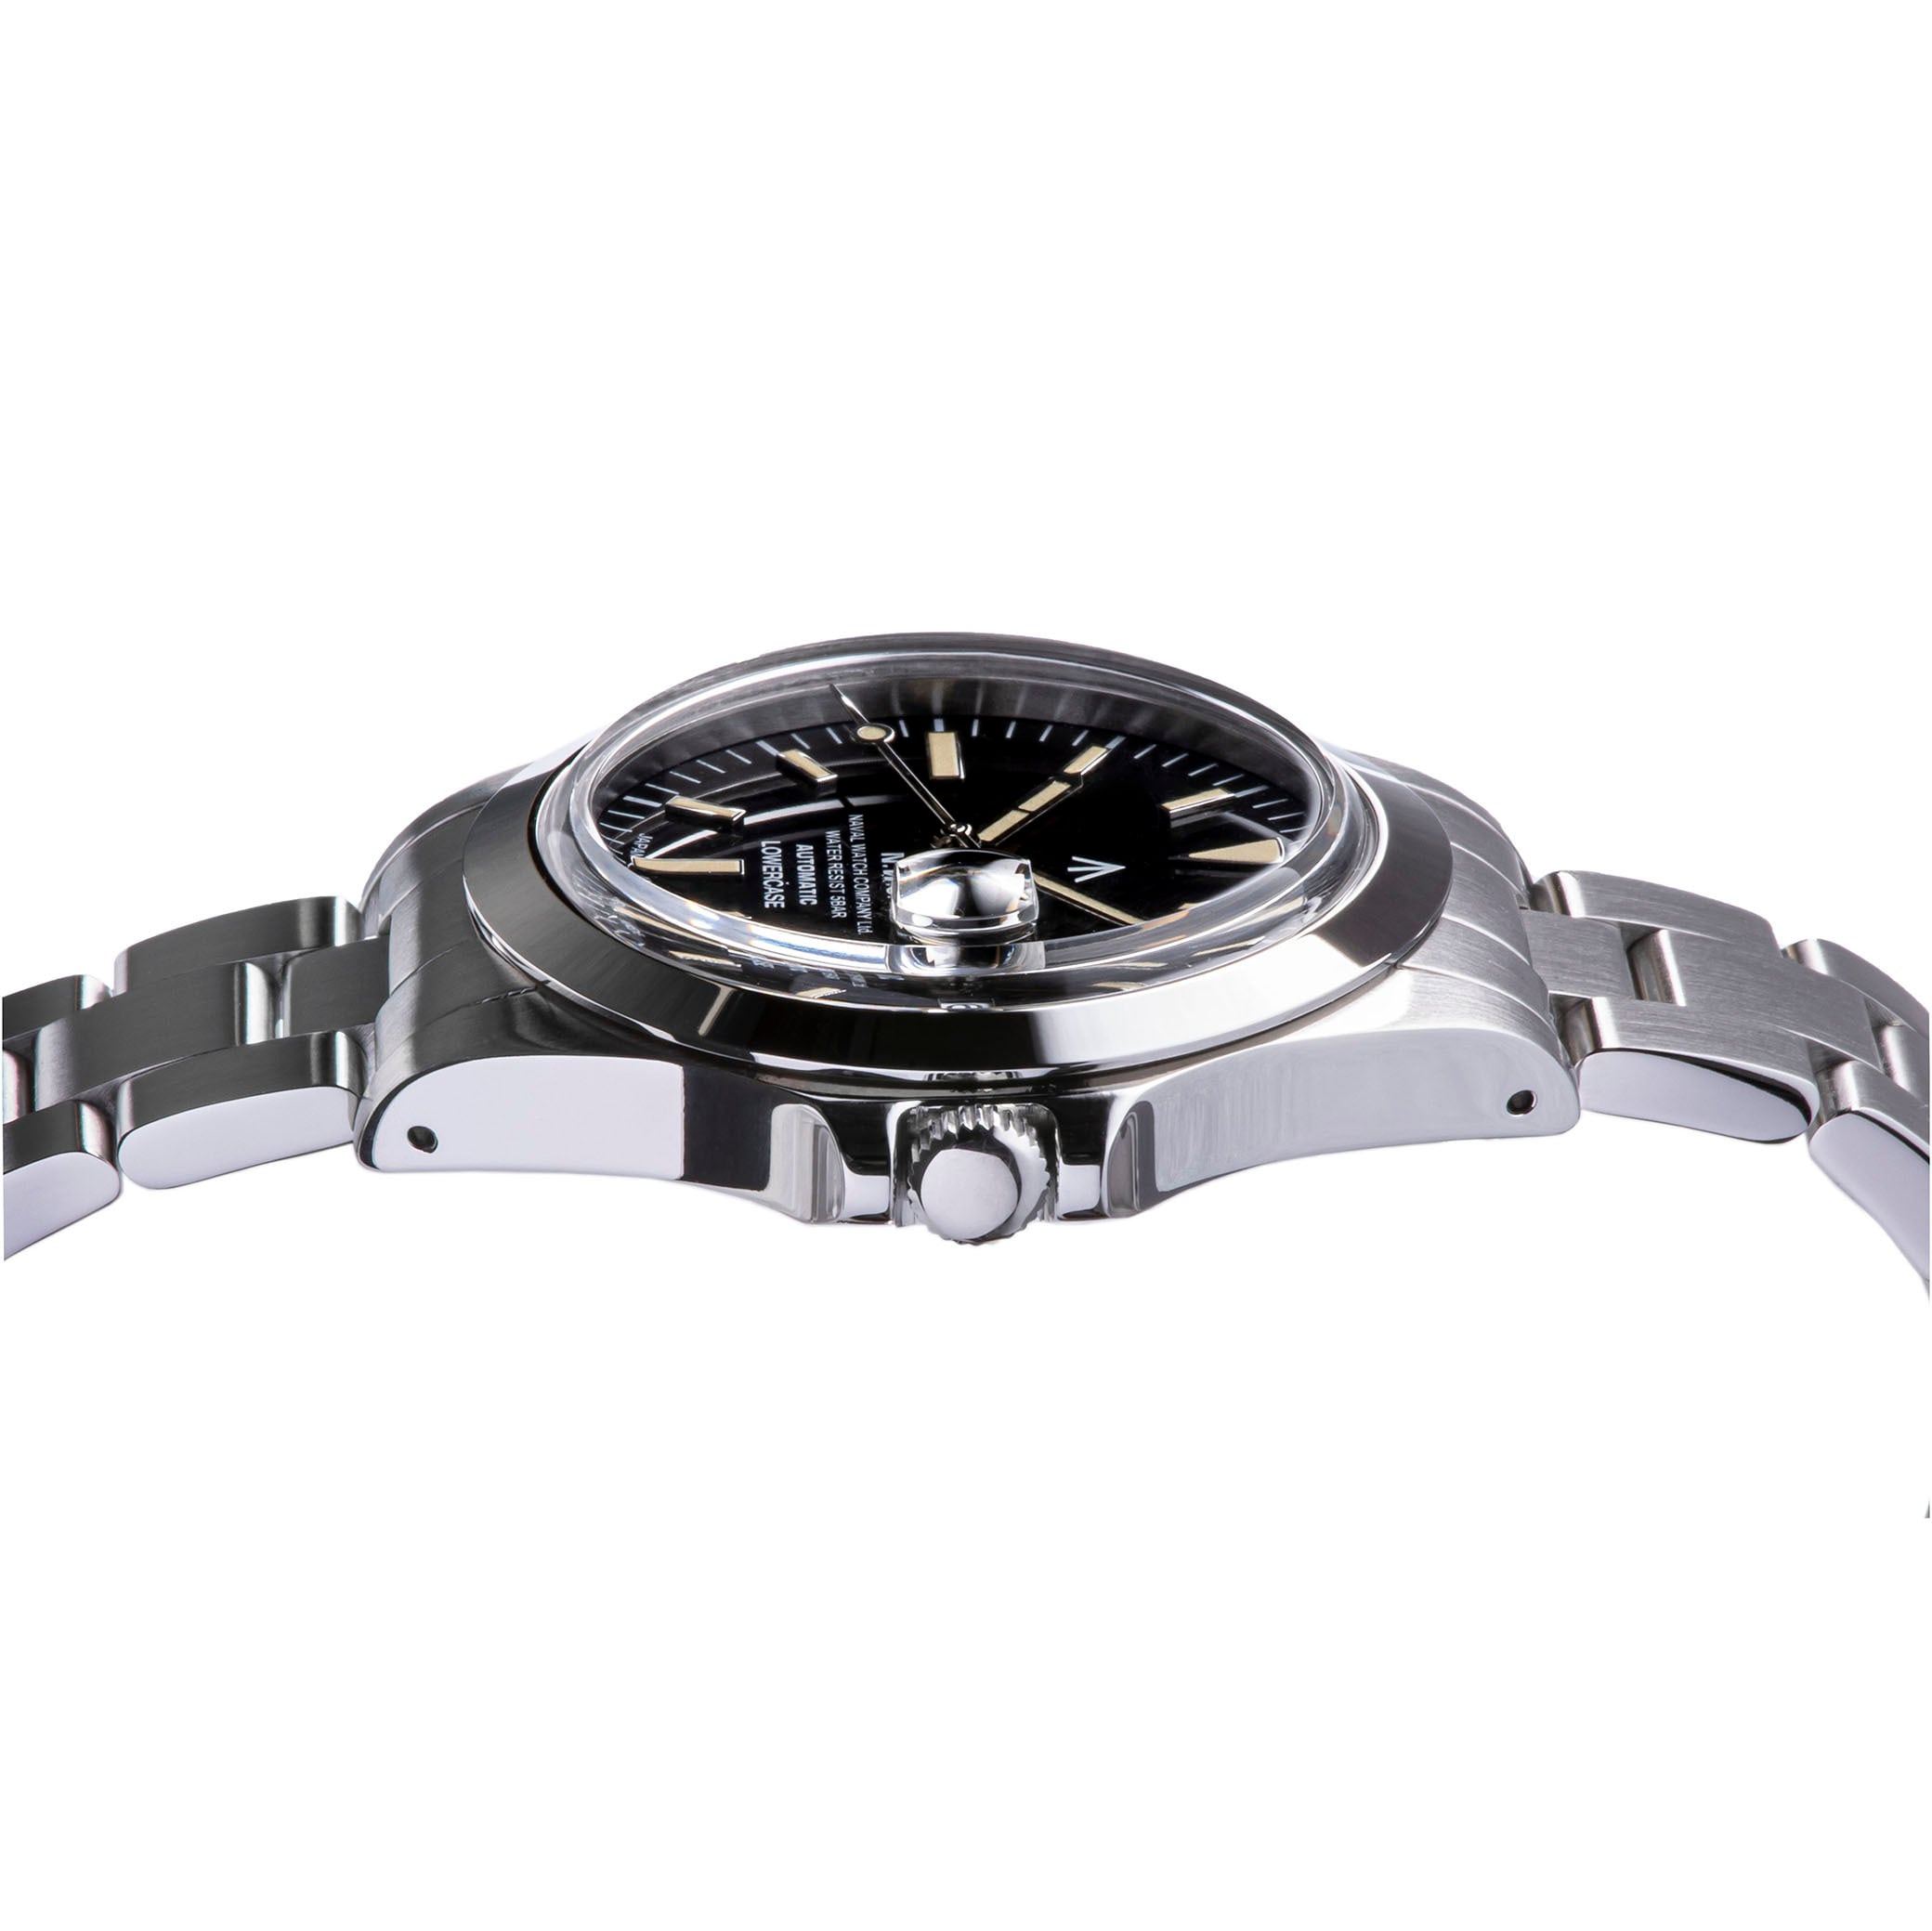 NAVAL WATCH Produced byLOWERCASE FRXA001